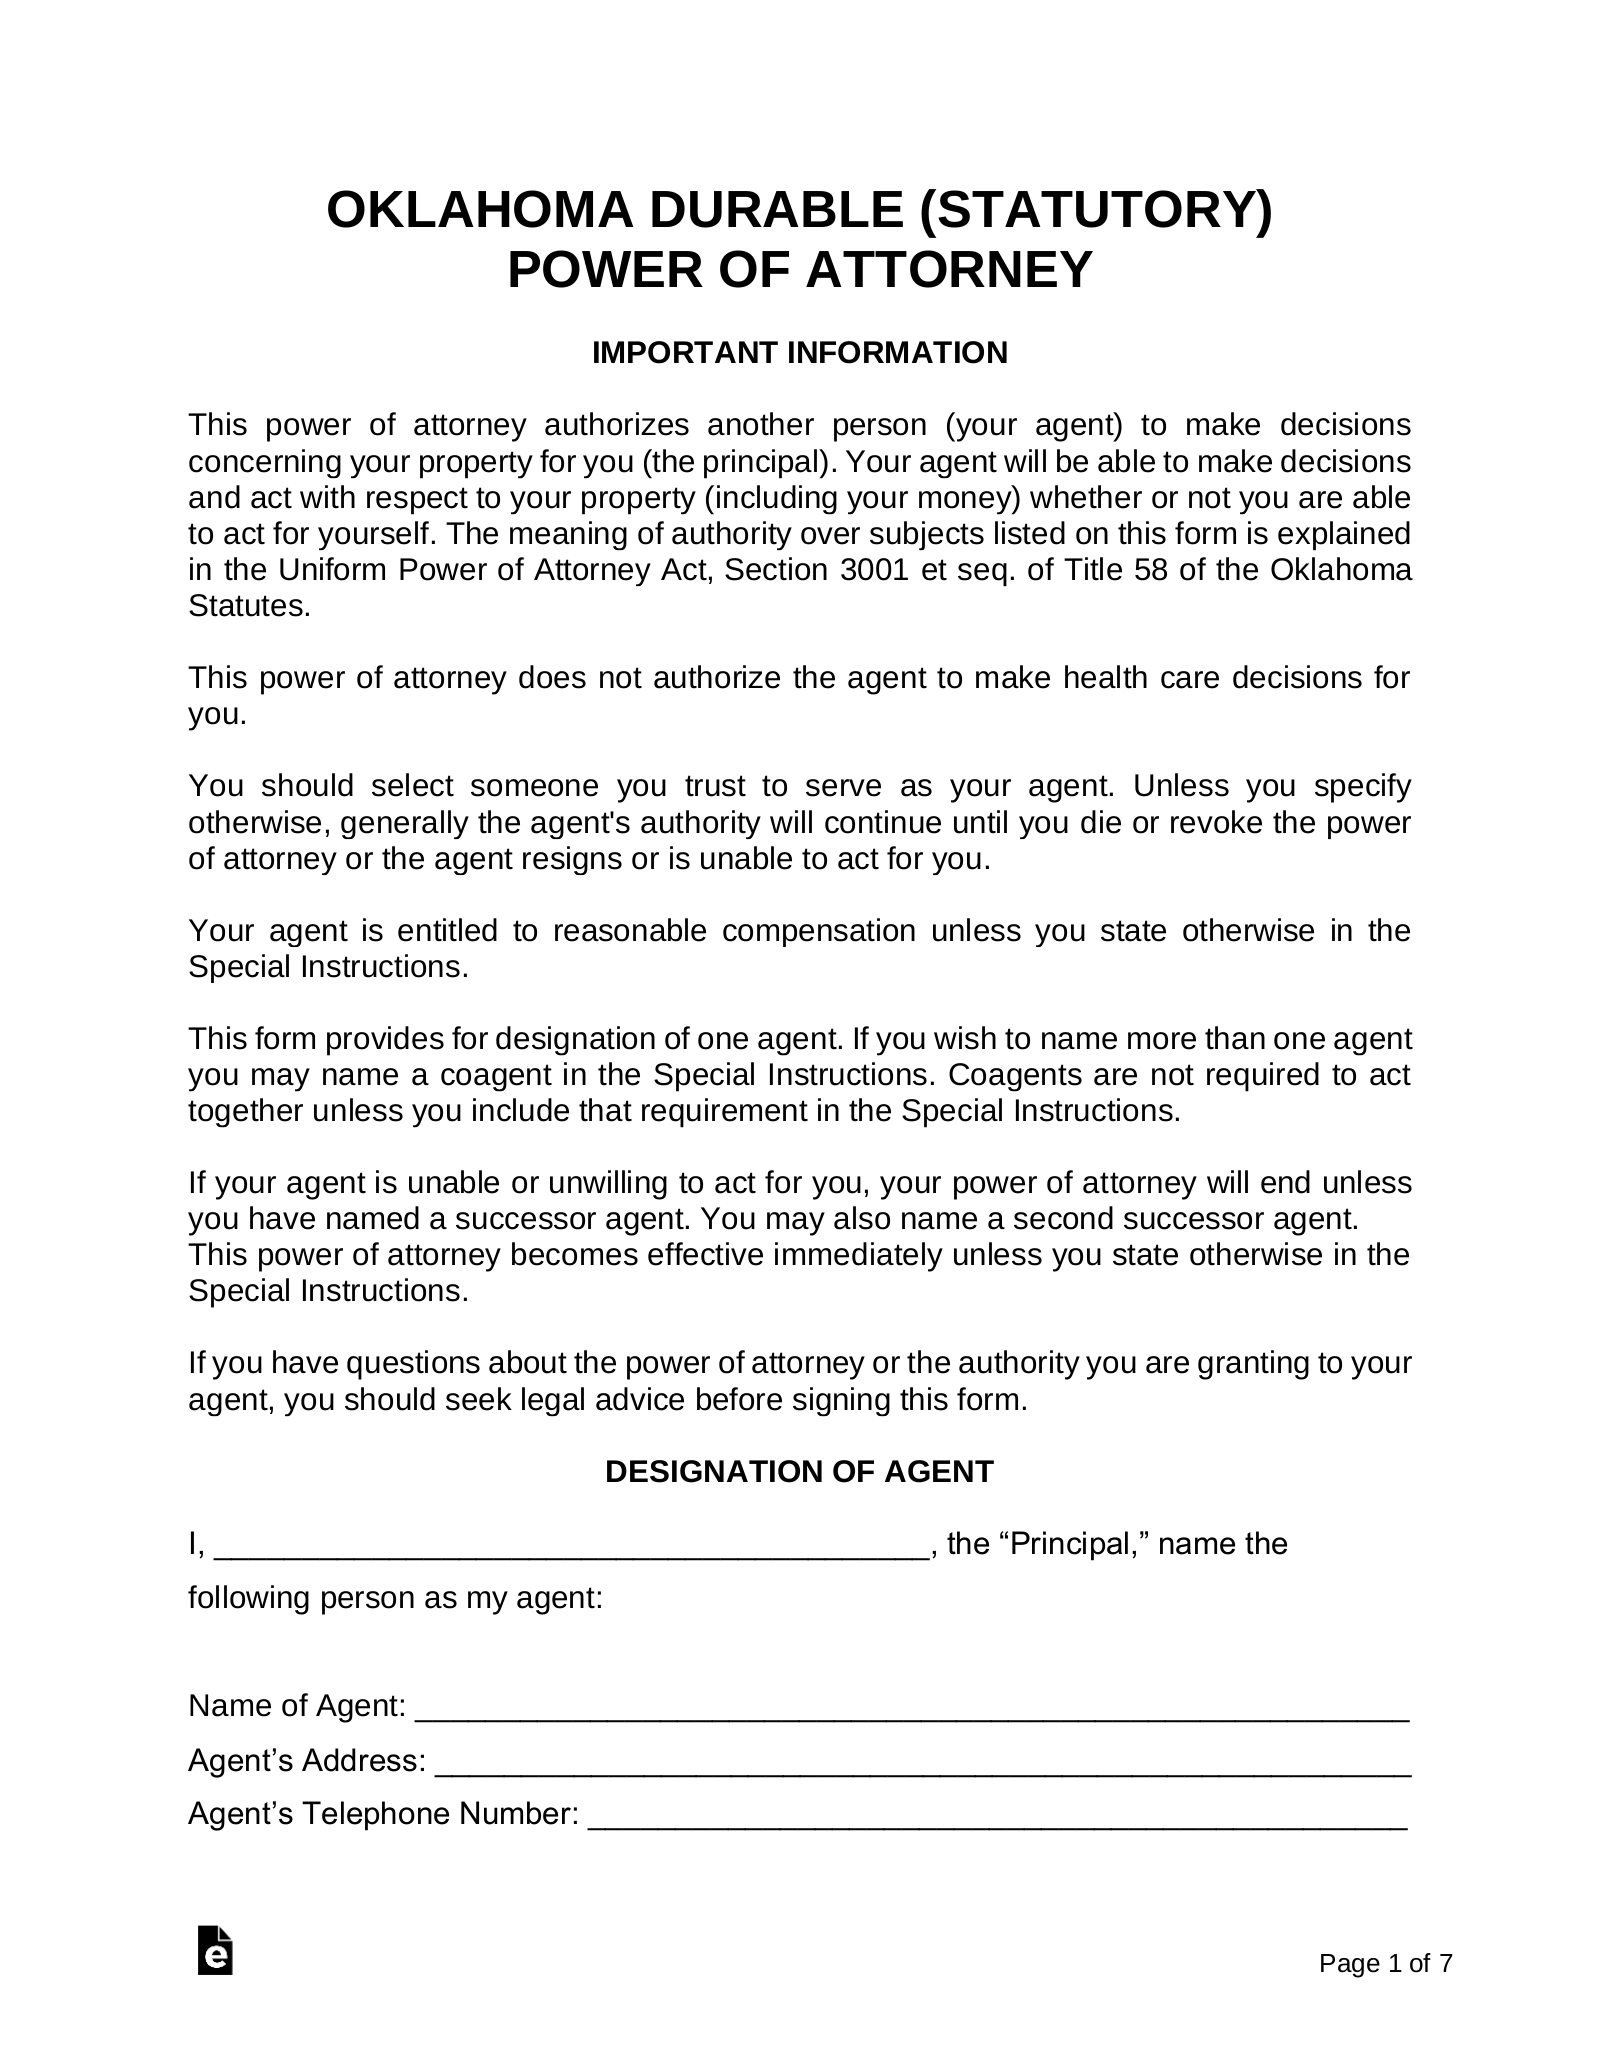 Oklahoma Durable (Financial) Power of Attorney Form